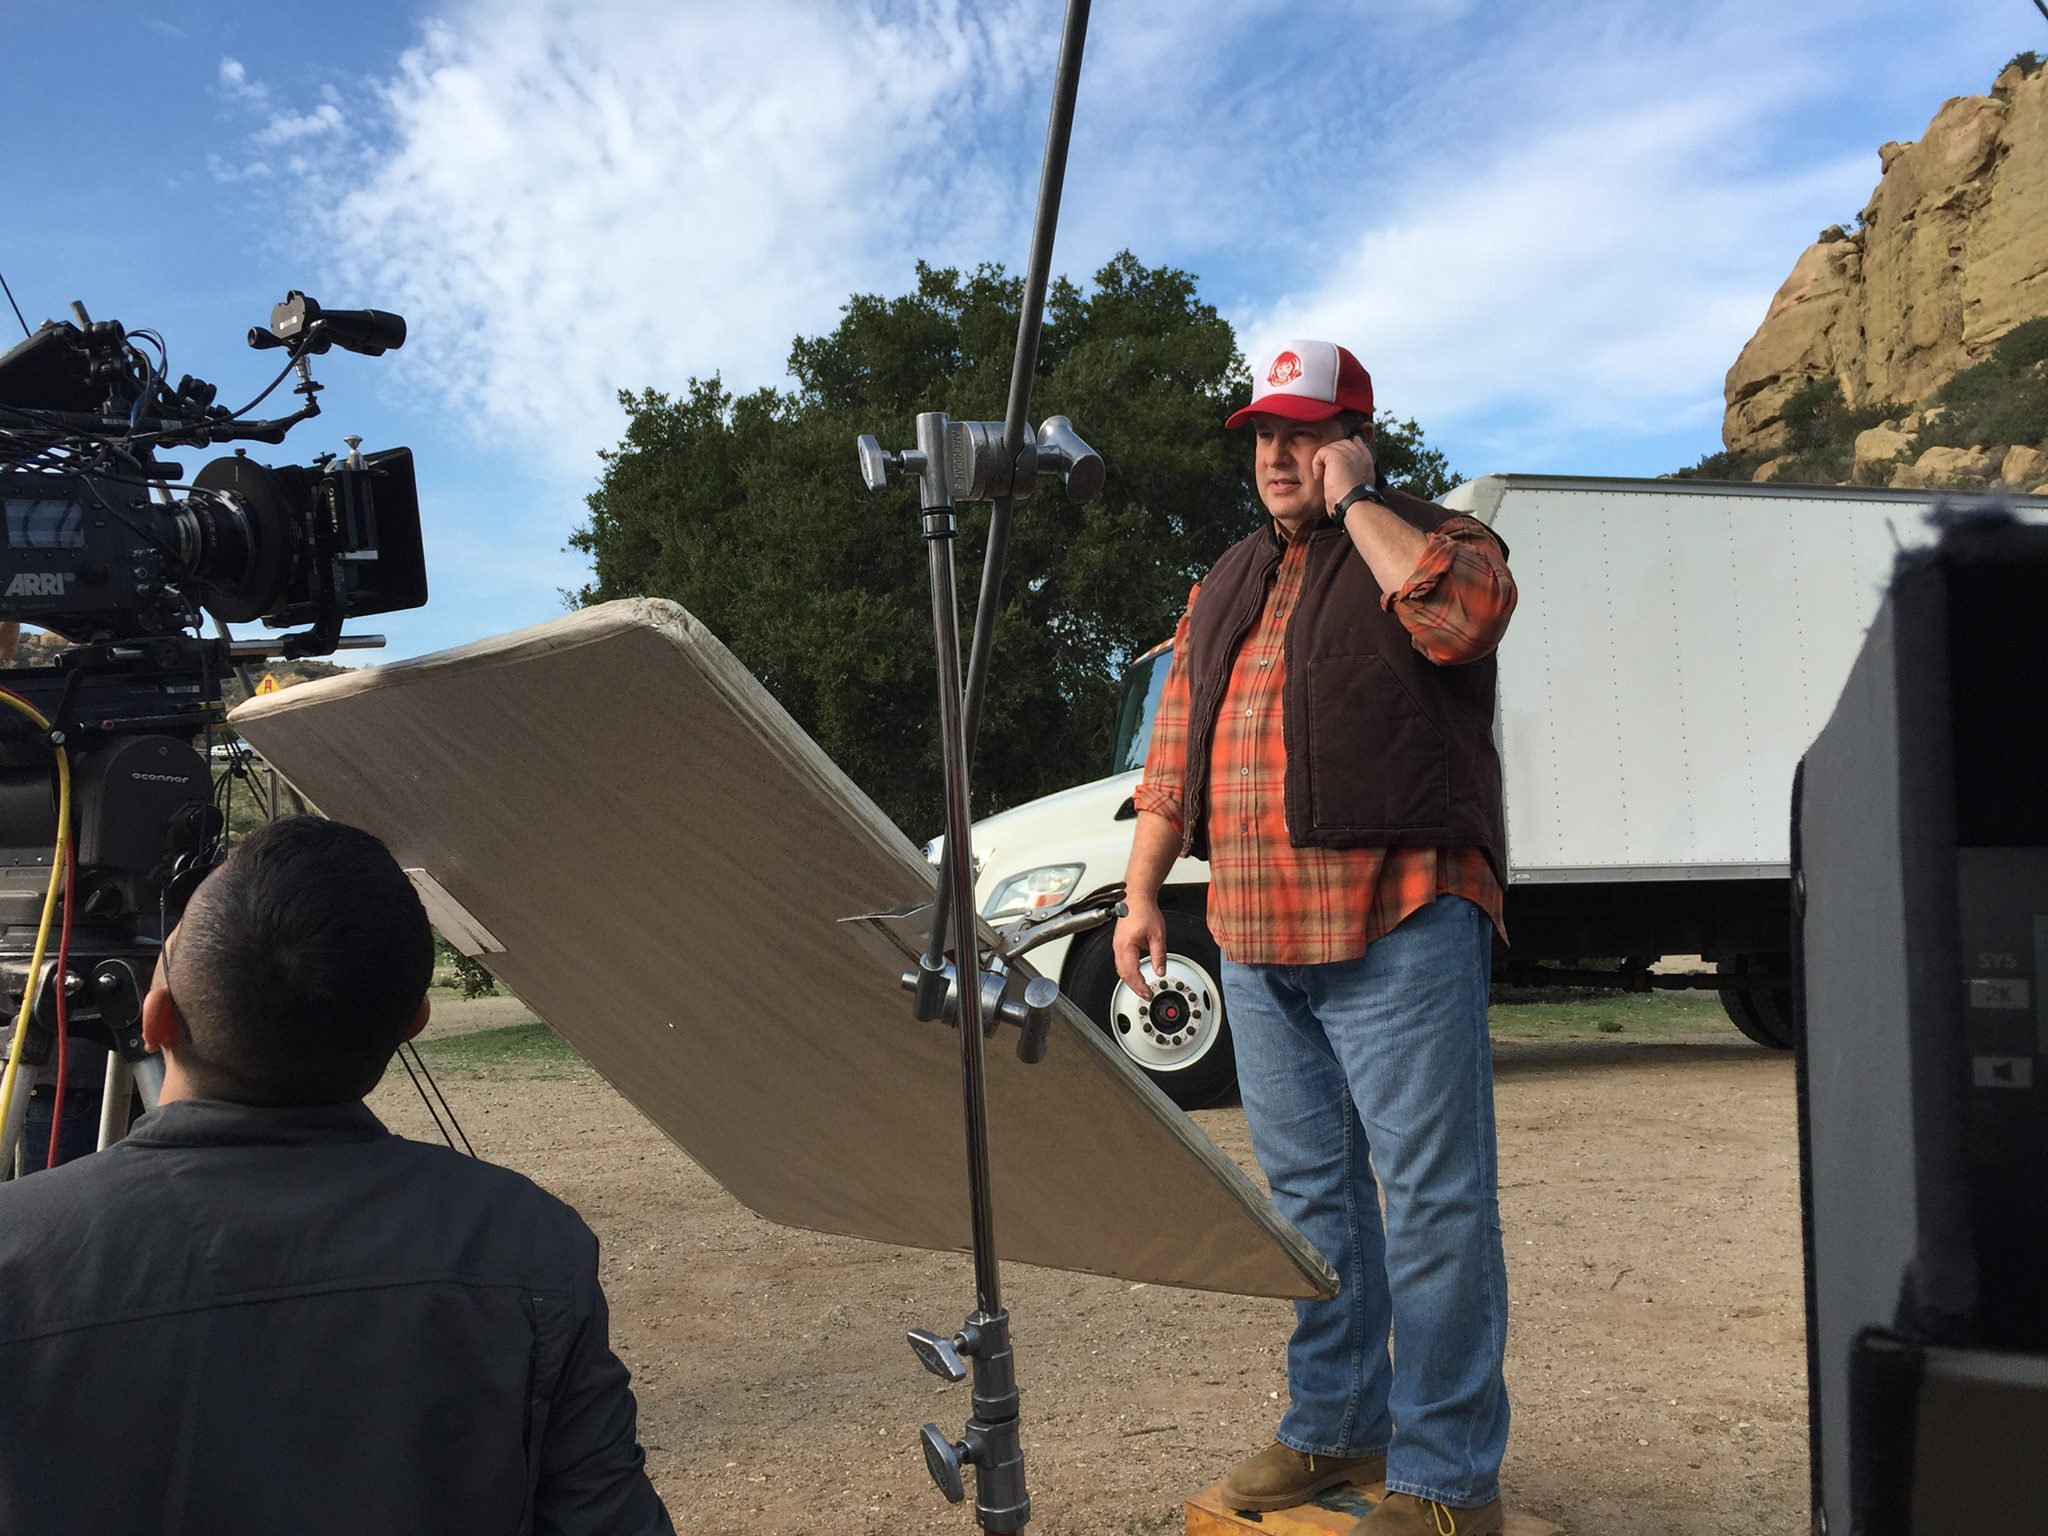 Roger Rignack as the Truck Driver in the 99c Question Wendy's commercial.